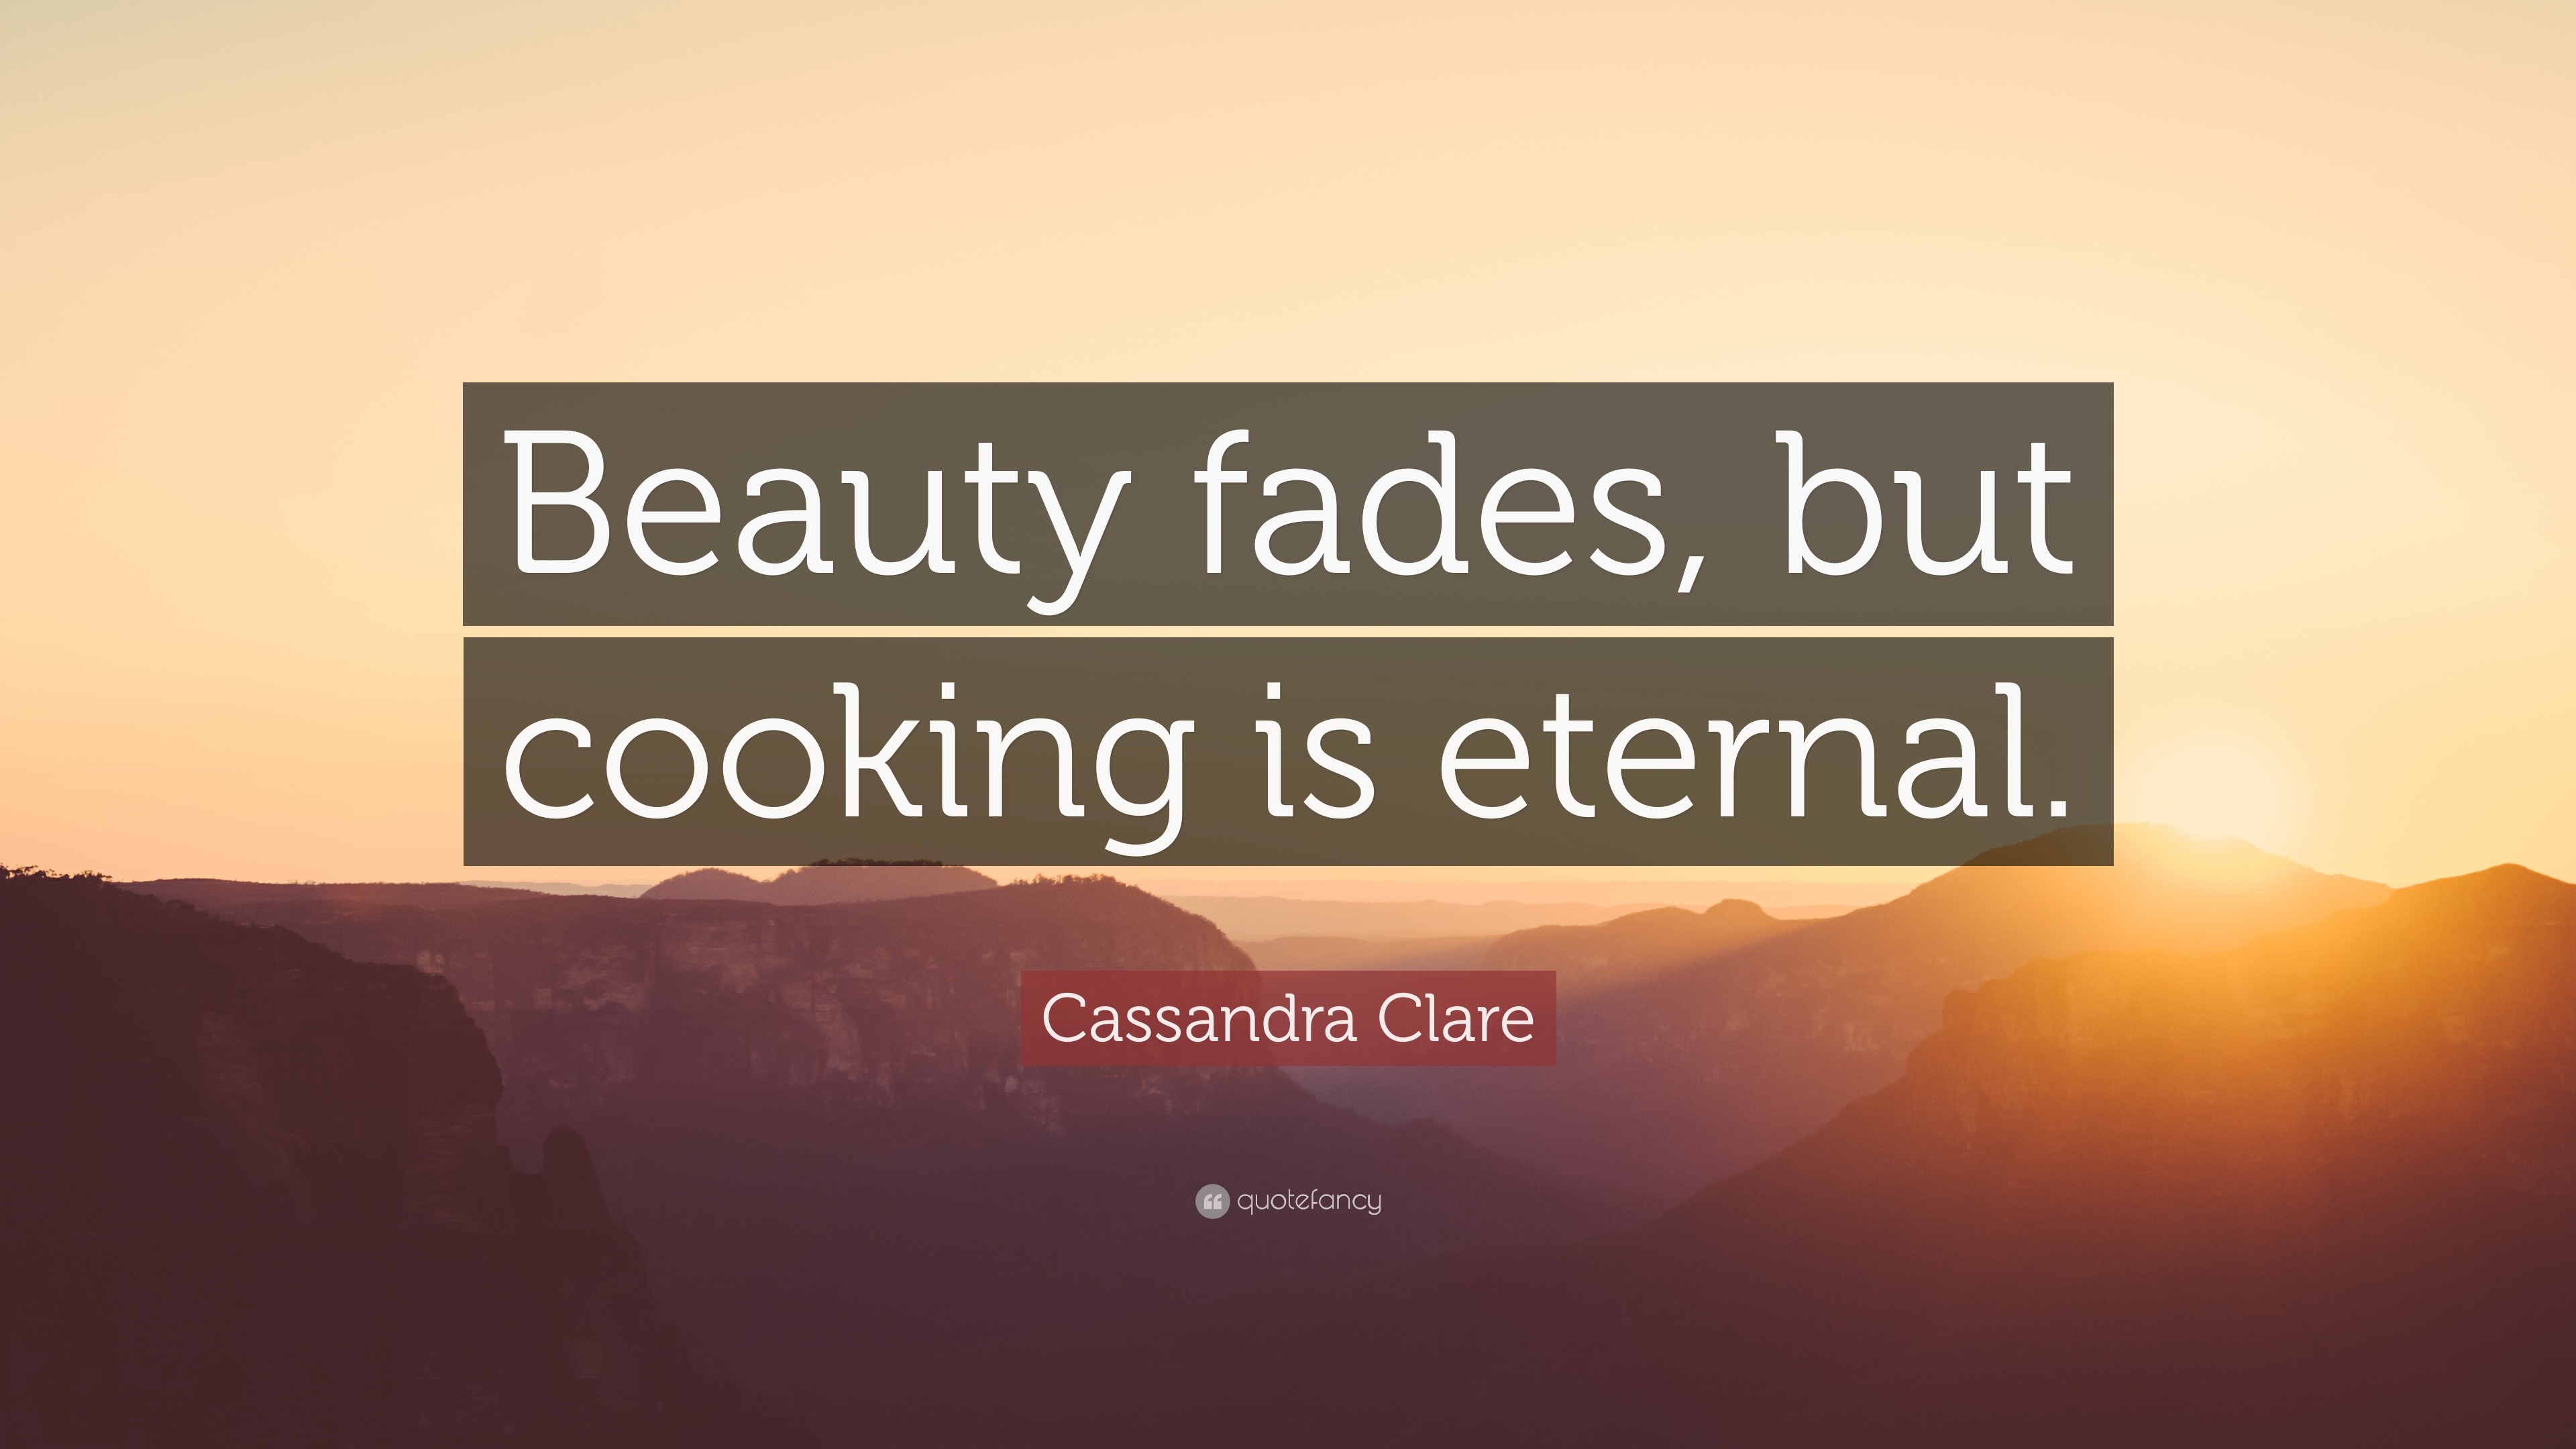 Cassandra Clare Quote: "Beauty fades, but cooking is ...